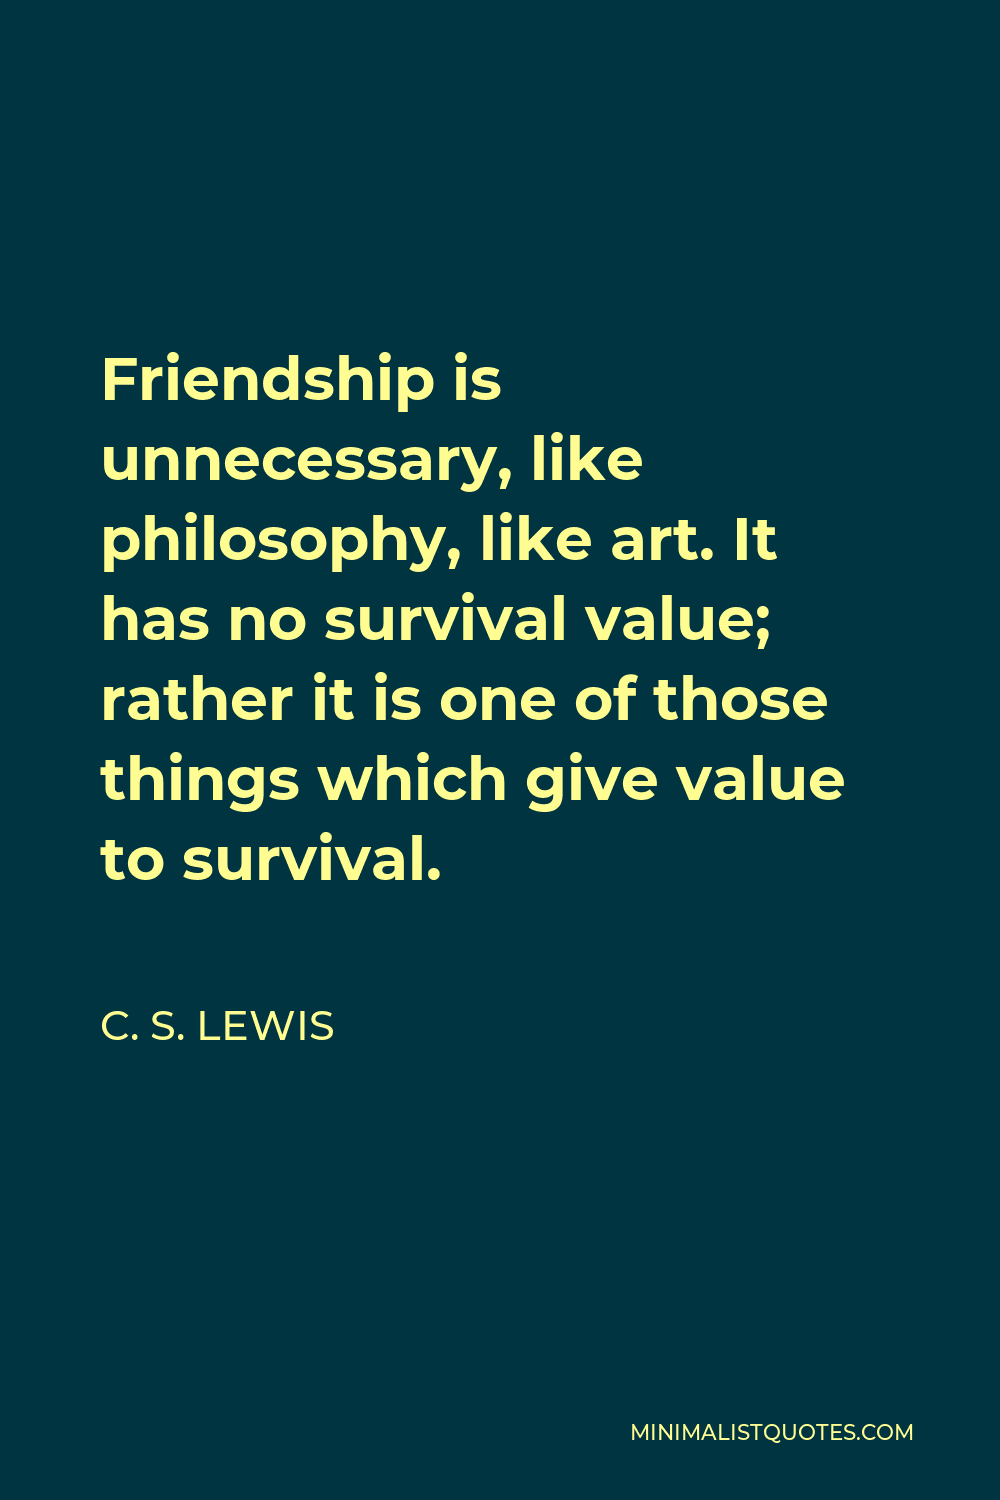 C. S. Lewis Quote - Friendship is unnecessary, like philosophy, like art. It has no survival value; rather it is one of those things which give value to survival.